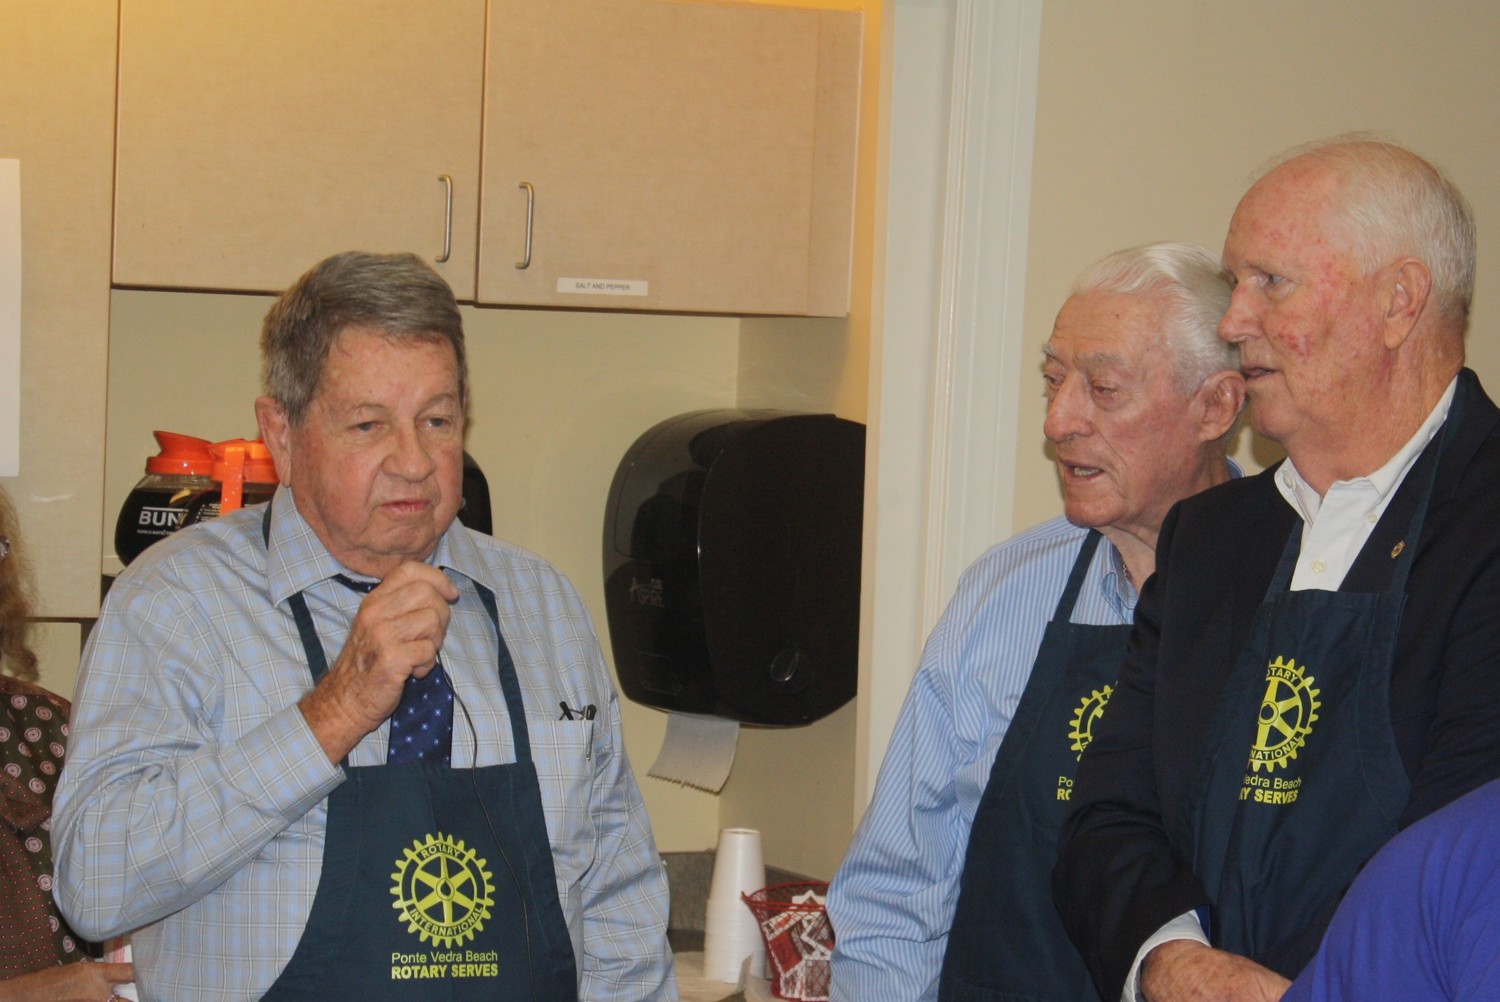 Vietnam veteran and Rotarian Bill Hill (left) shares his combat experiences with the attendees of the luncheon alongside fellow Rotarians Don Blackburn (WWII veteran) and Bruce Barber.